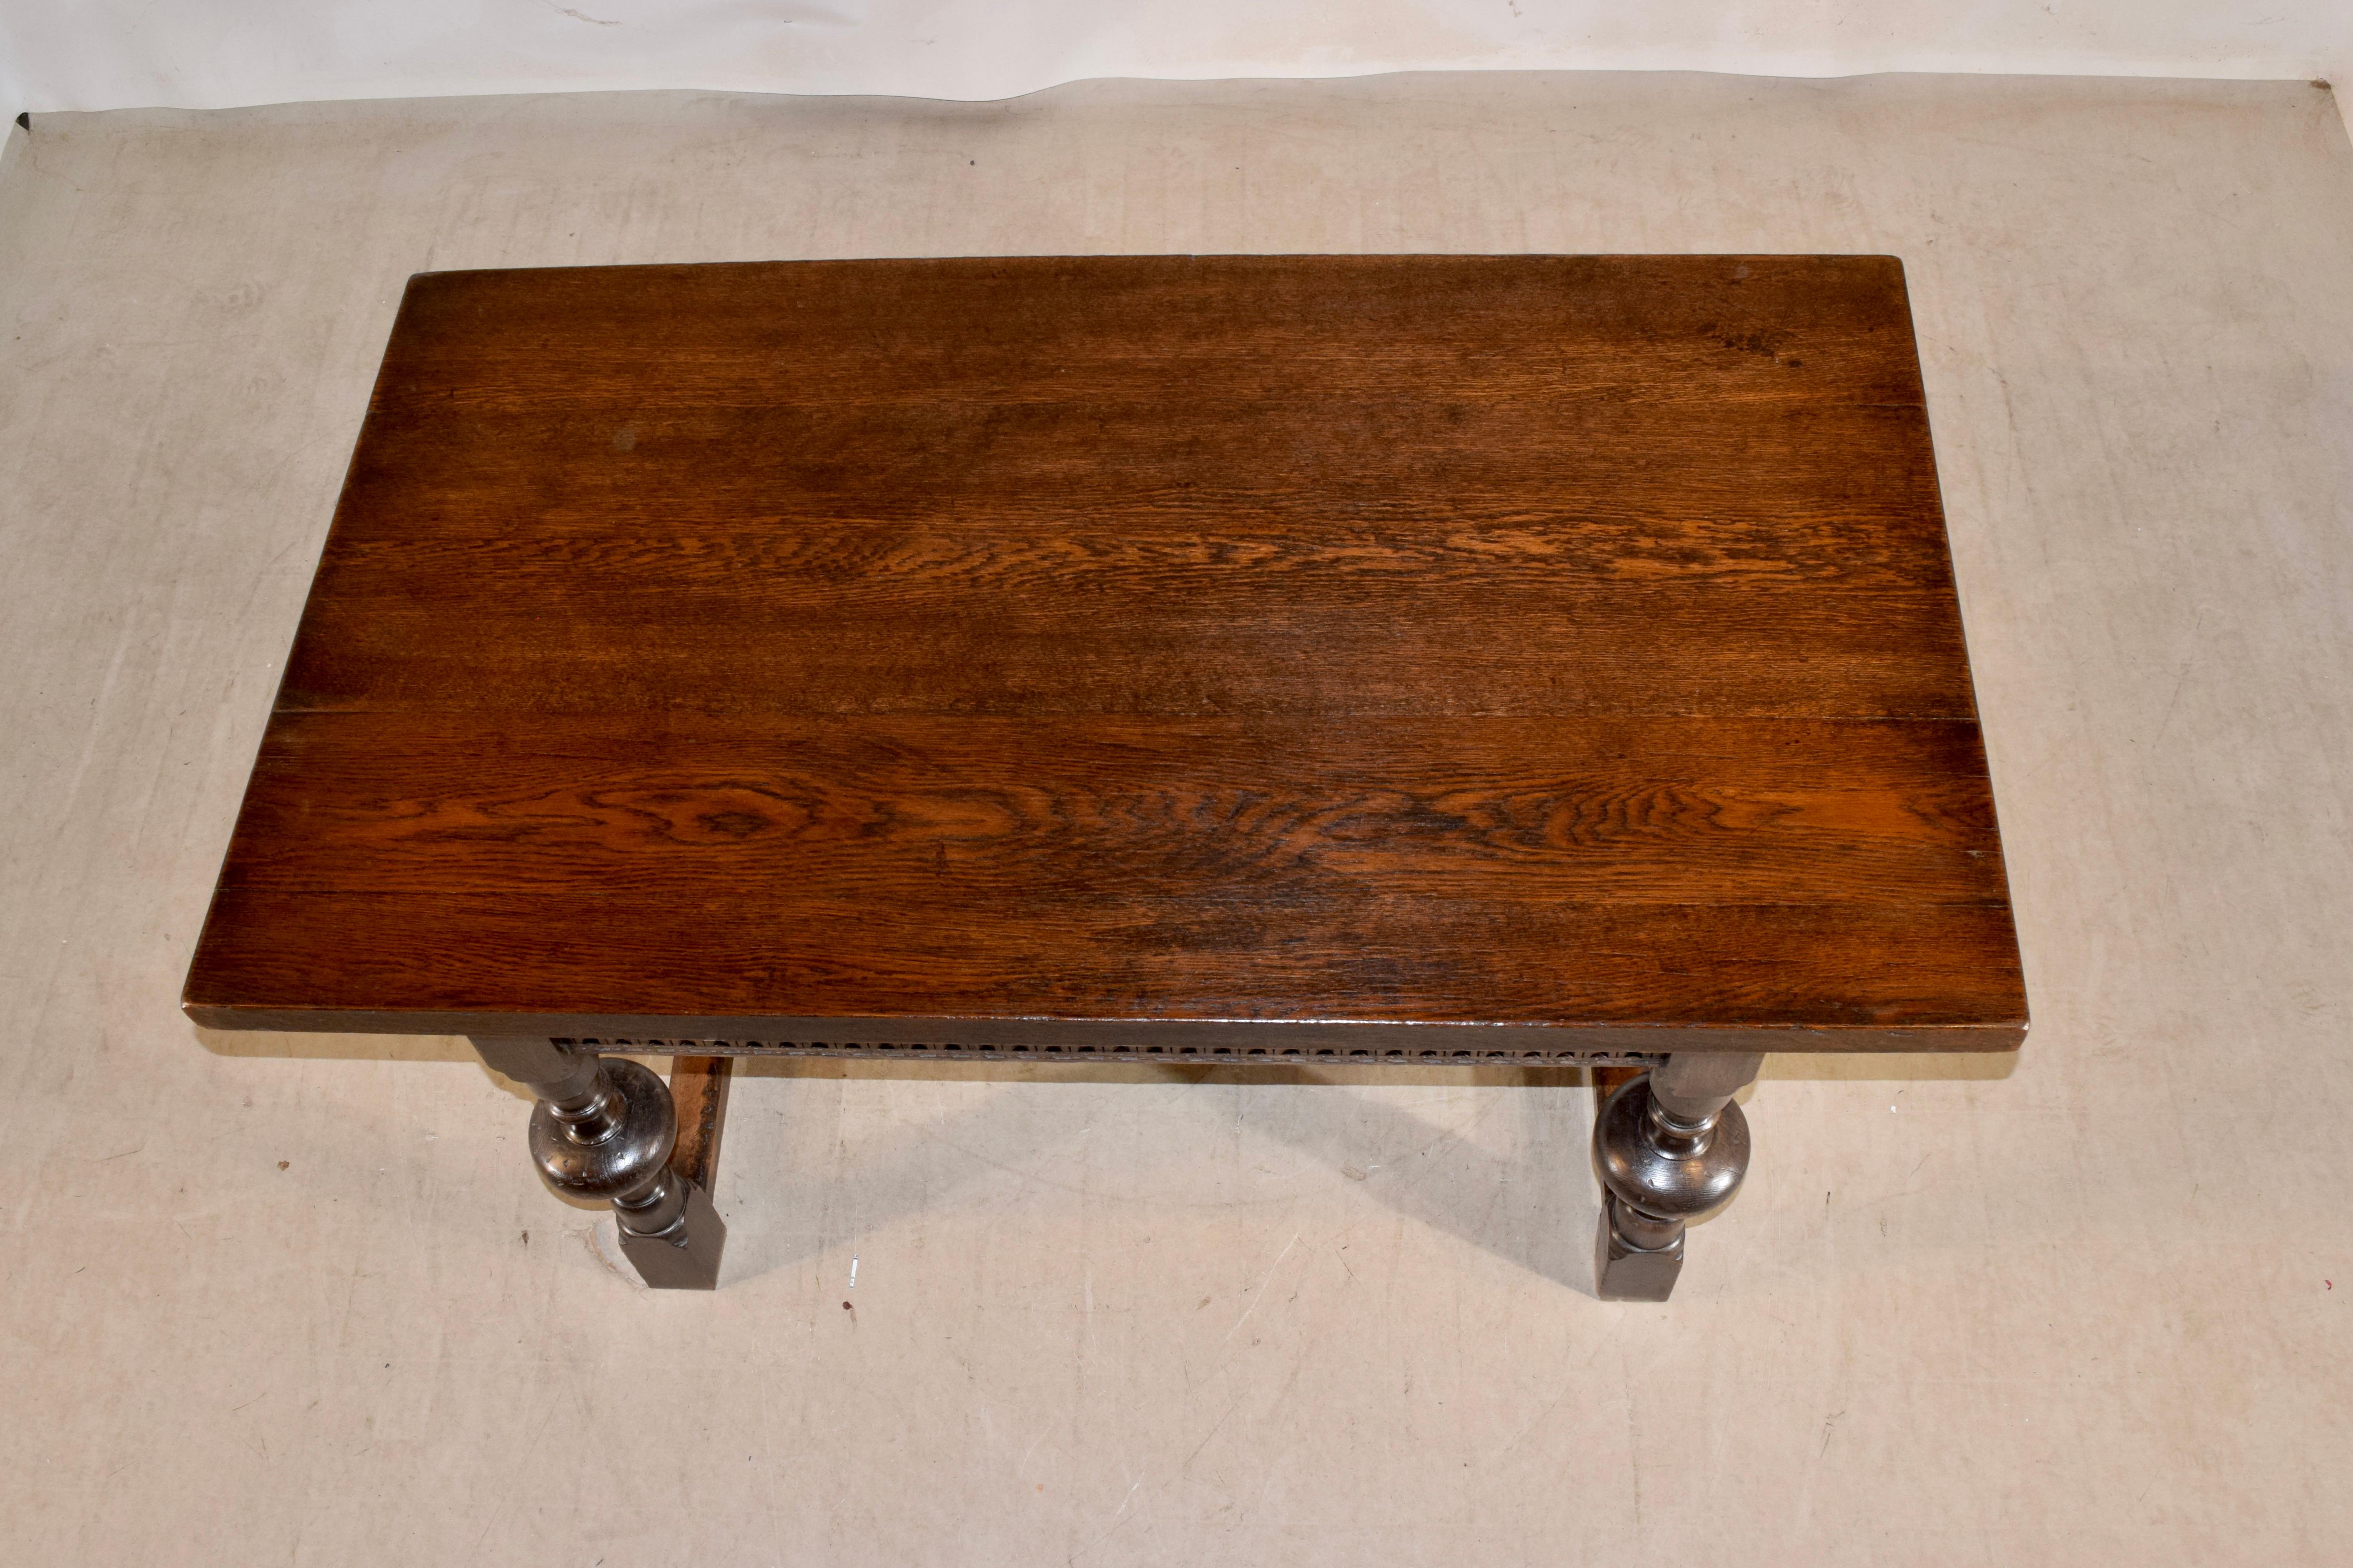 19th Century English Oak Desk with Two Drawers For Sale 5